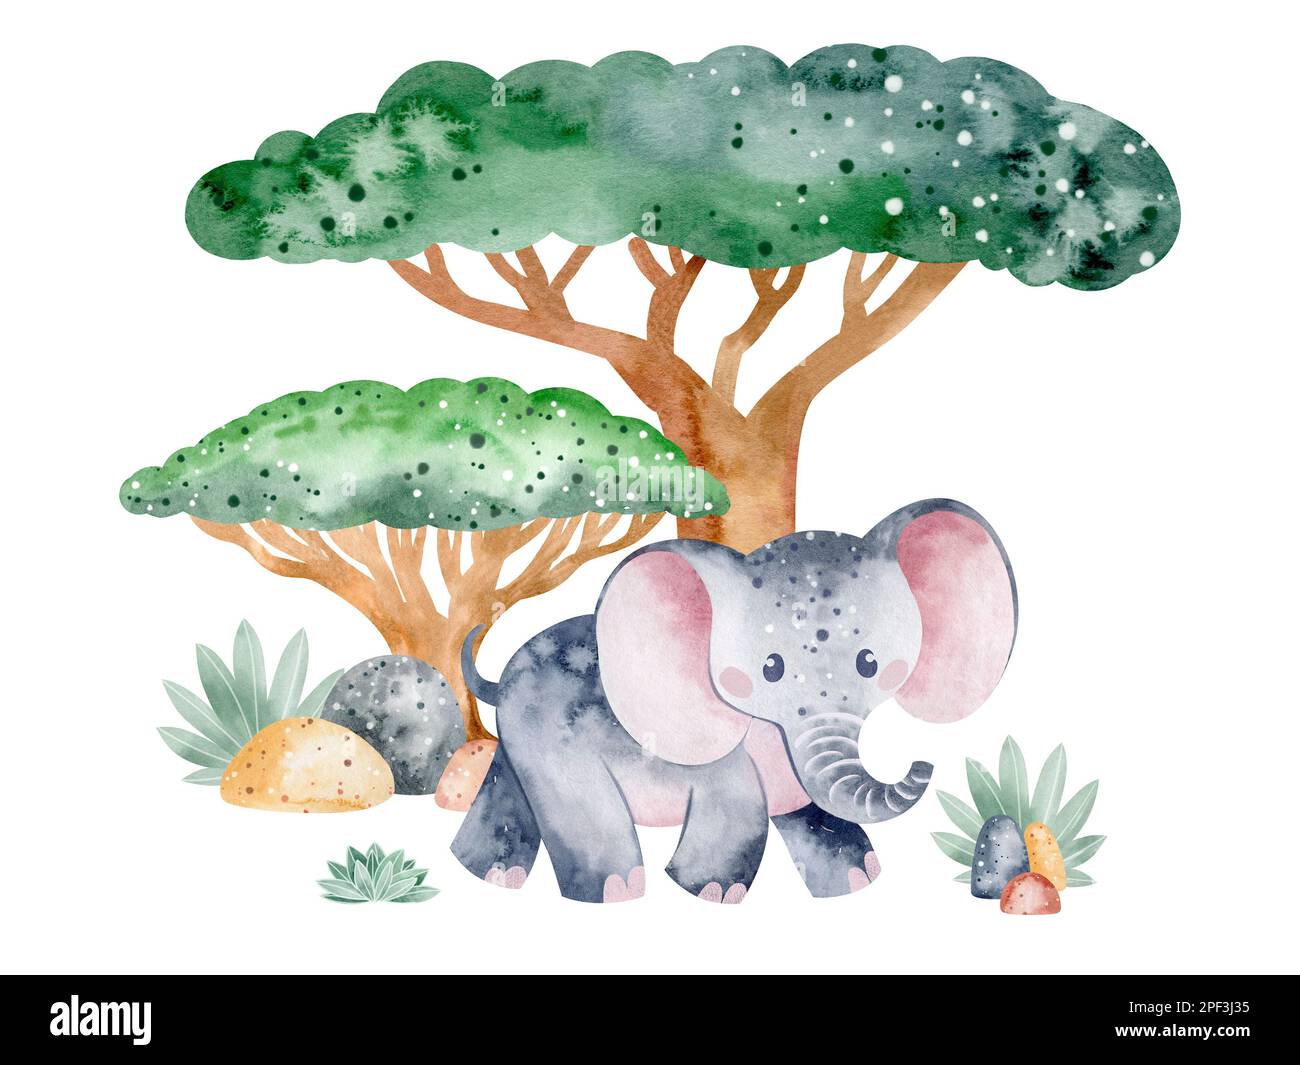 Set of watercolor illustrations of savannah animals in nature. Children's illustration of animals on a white background. Drawn by hand. Stock Photo